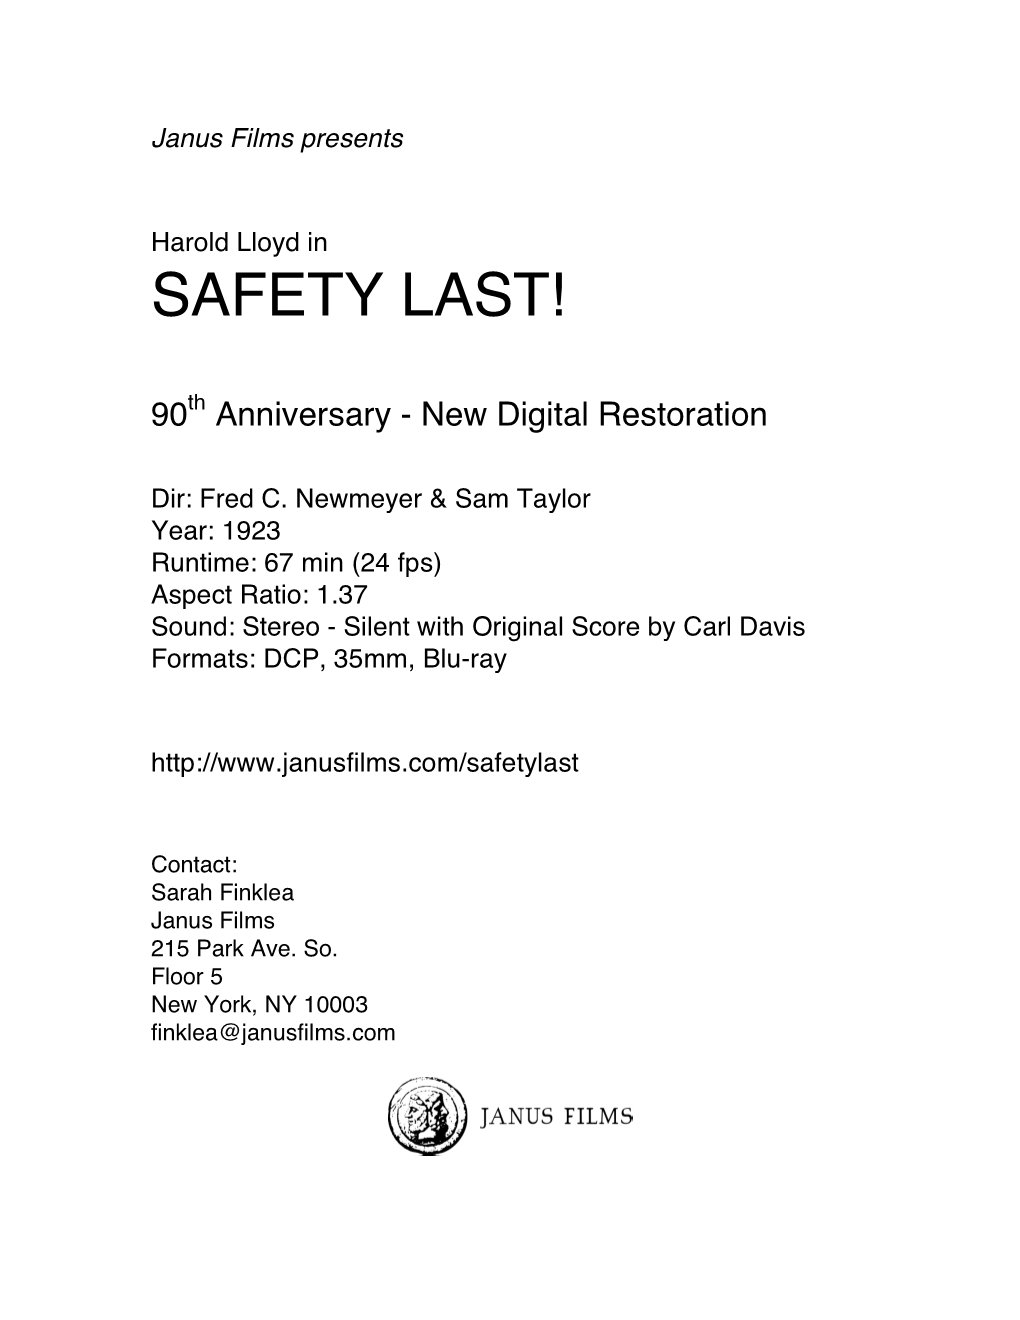 Safety Last Press Notes